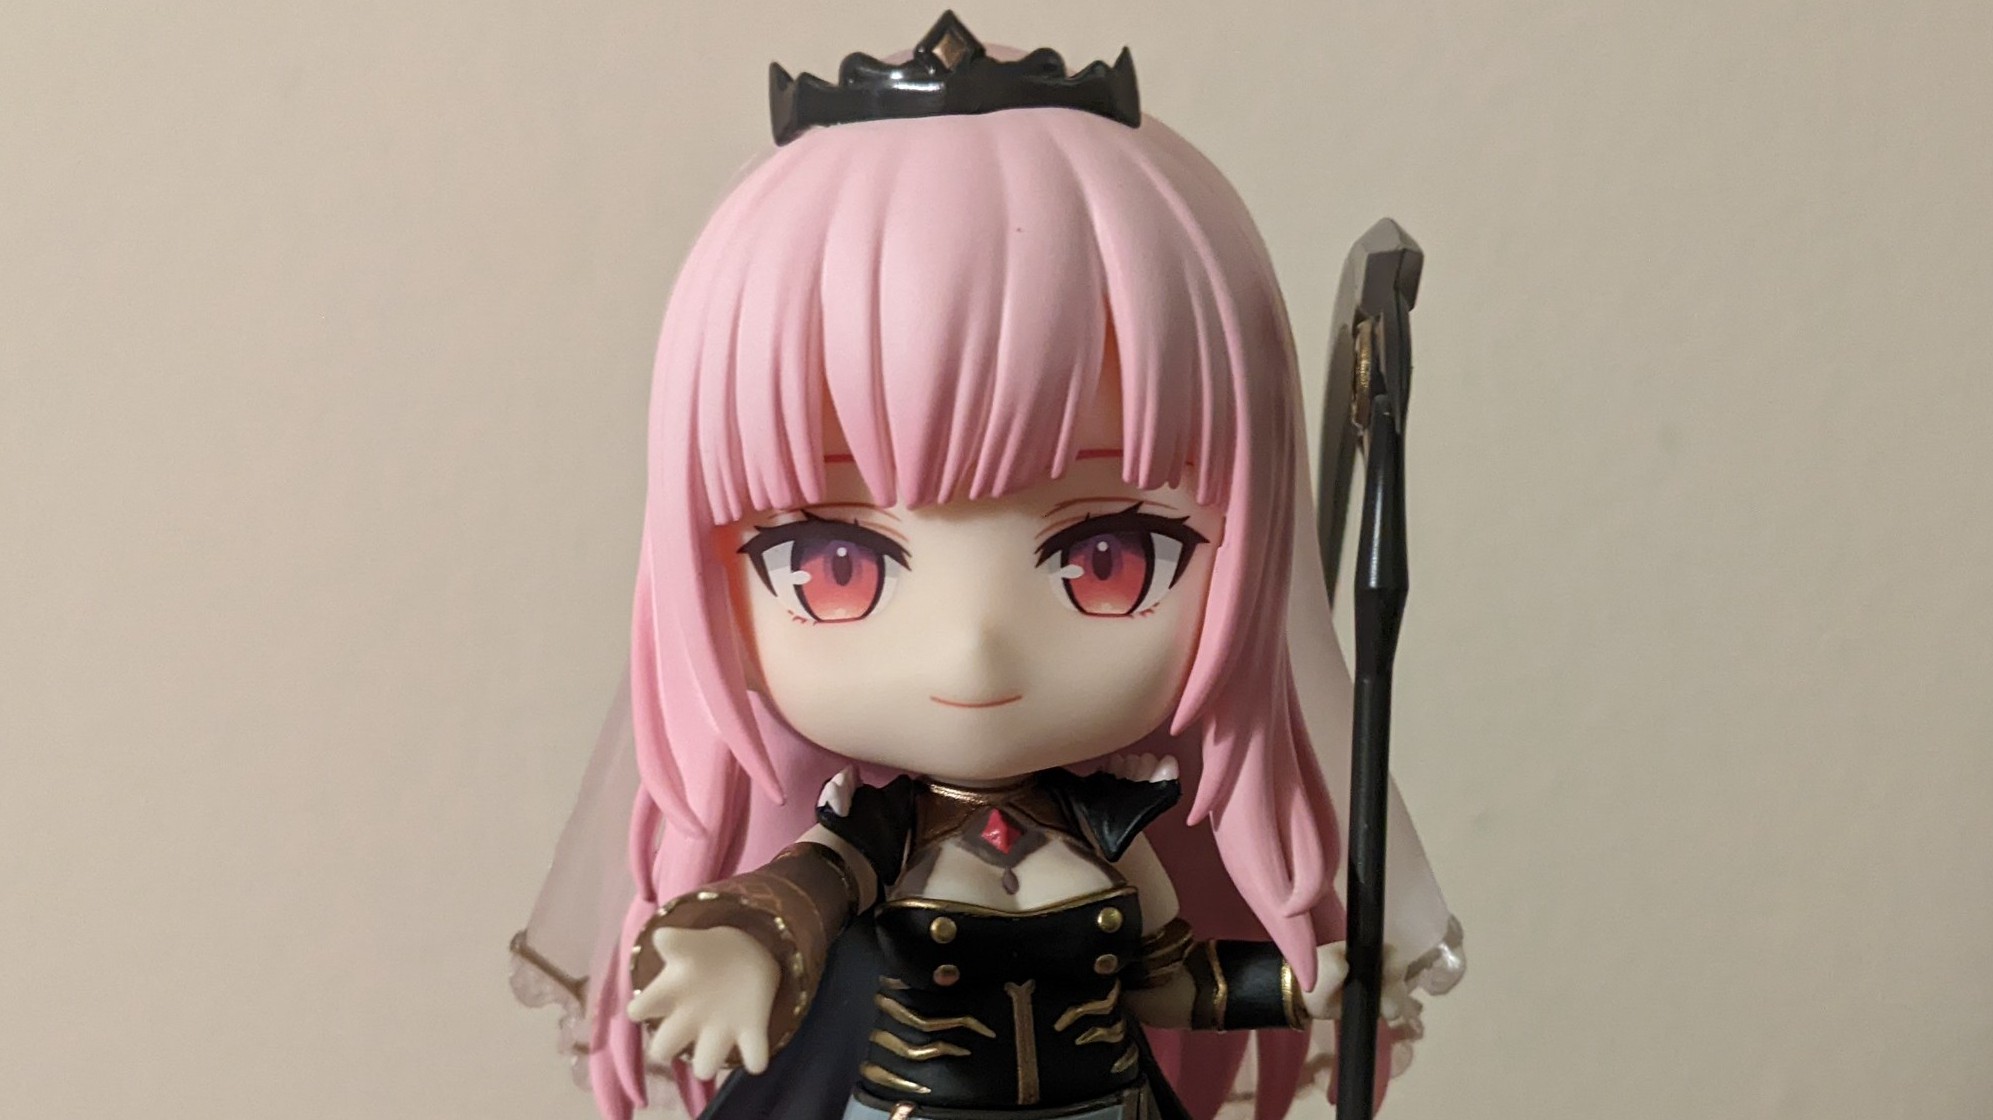 Calliope Mori Nendoroid Is an Intricate, but Fiddly Hololive Figure